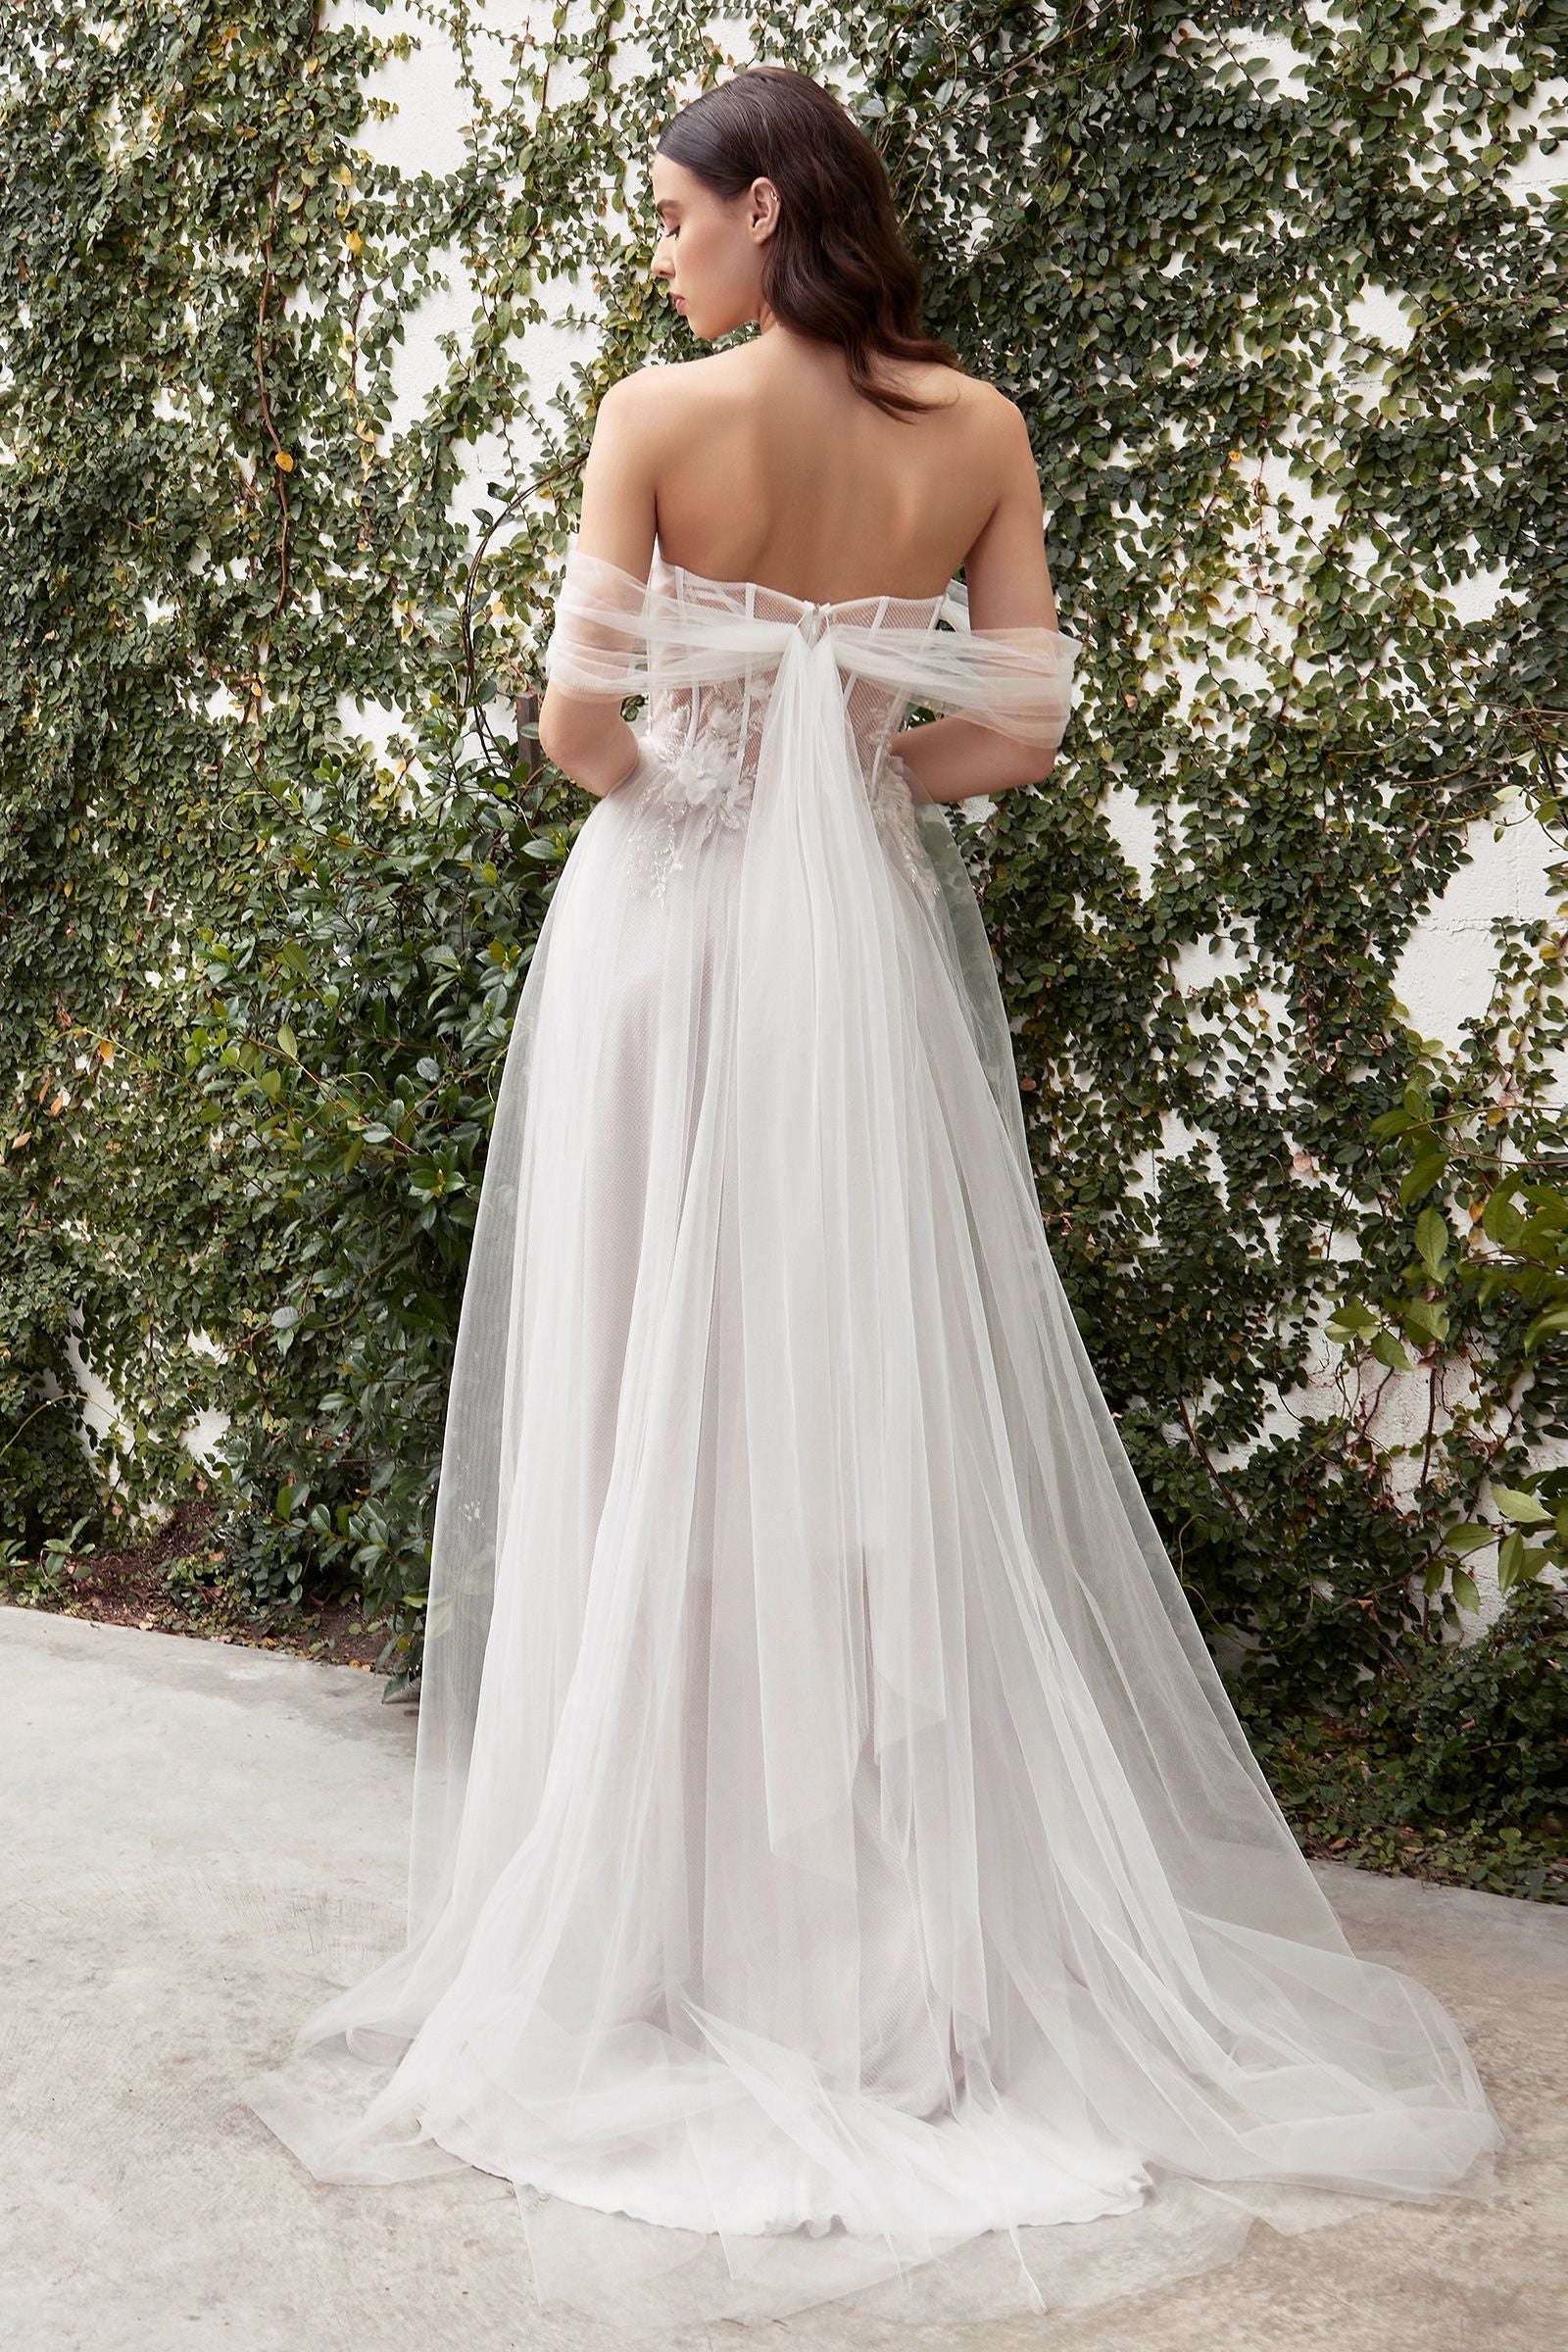 Dramatic bridal gown with a glittering corset bodice and soft tulle skirt